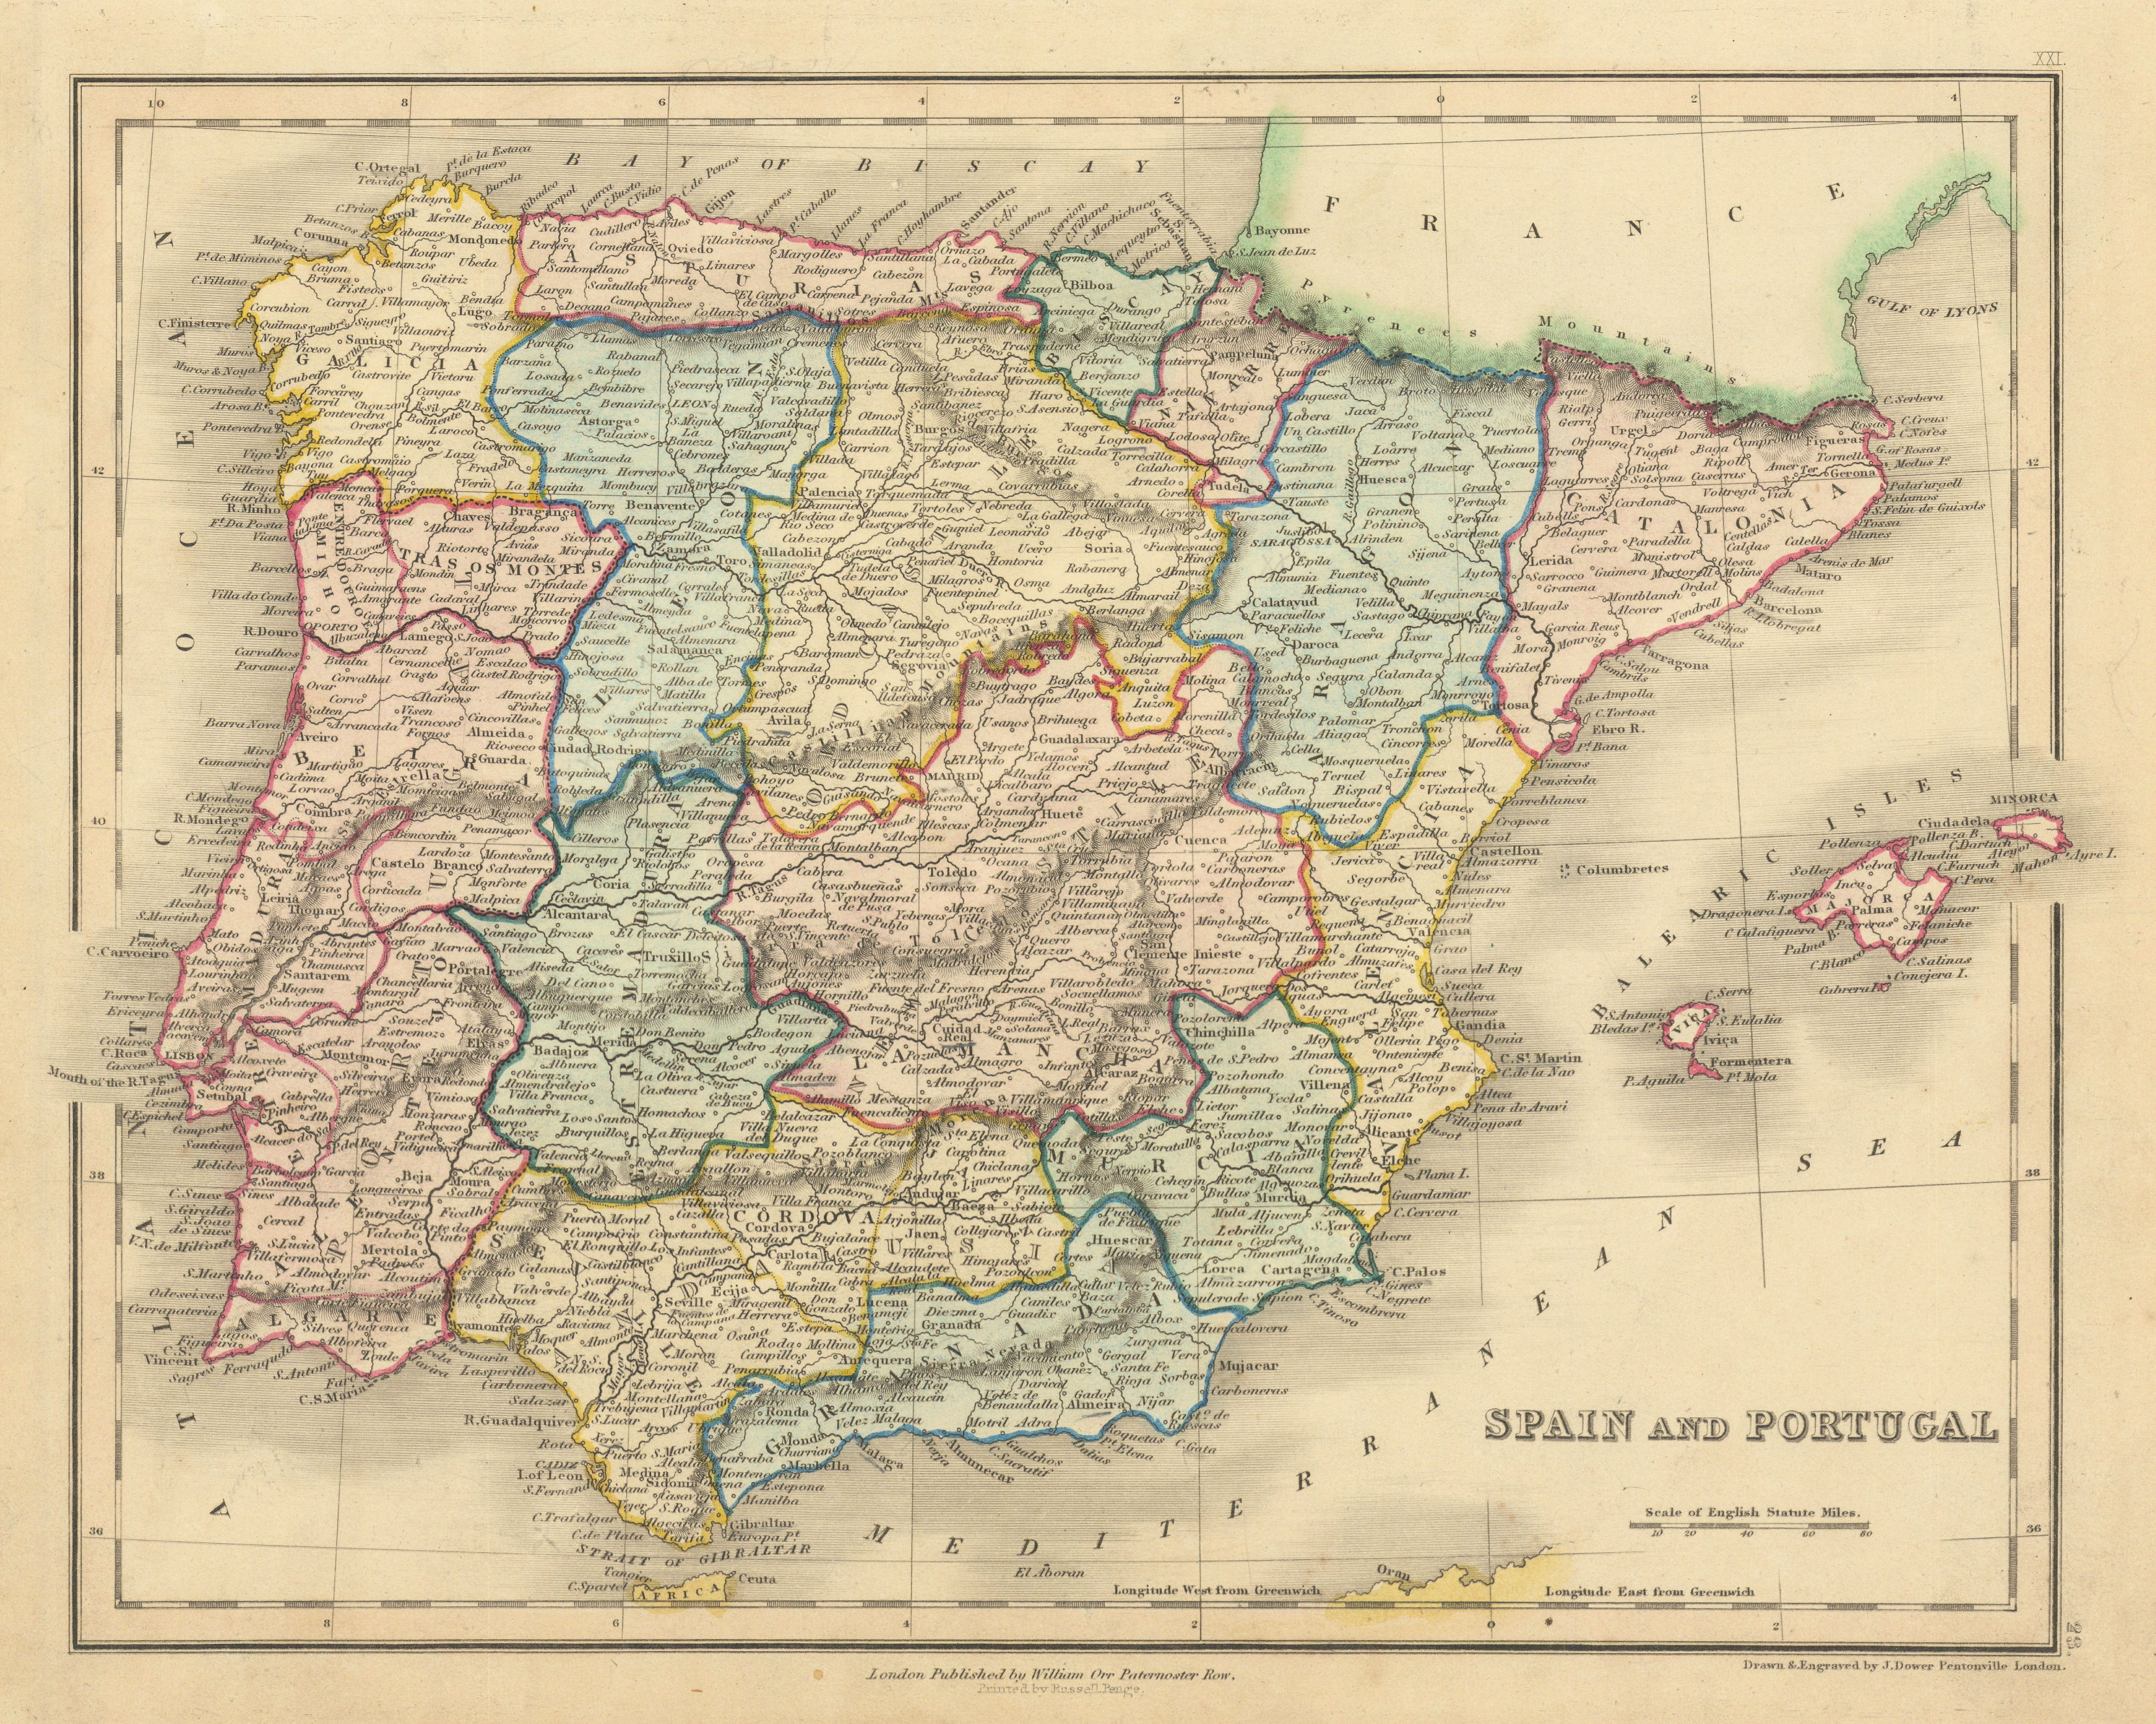 Associate Product Spain and Portugal in provinces by John Dower 1845 old antique map plan chart